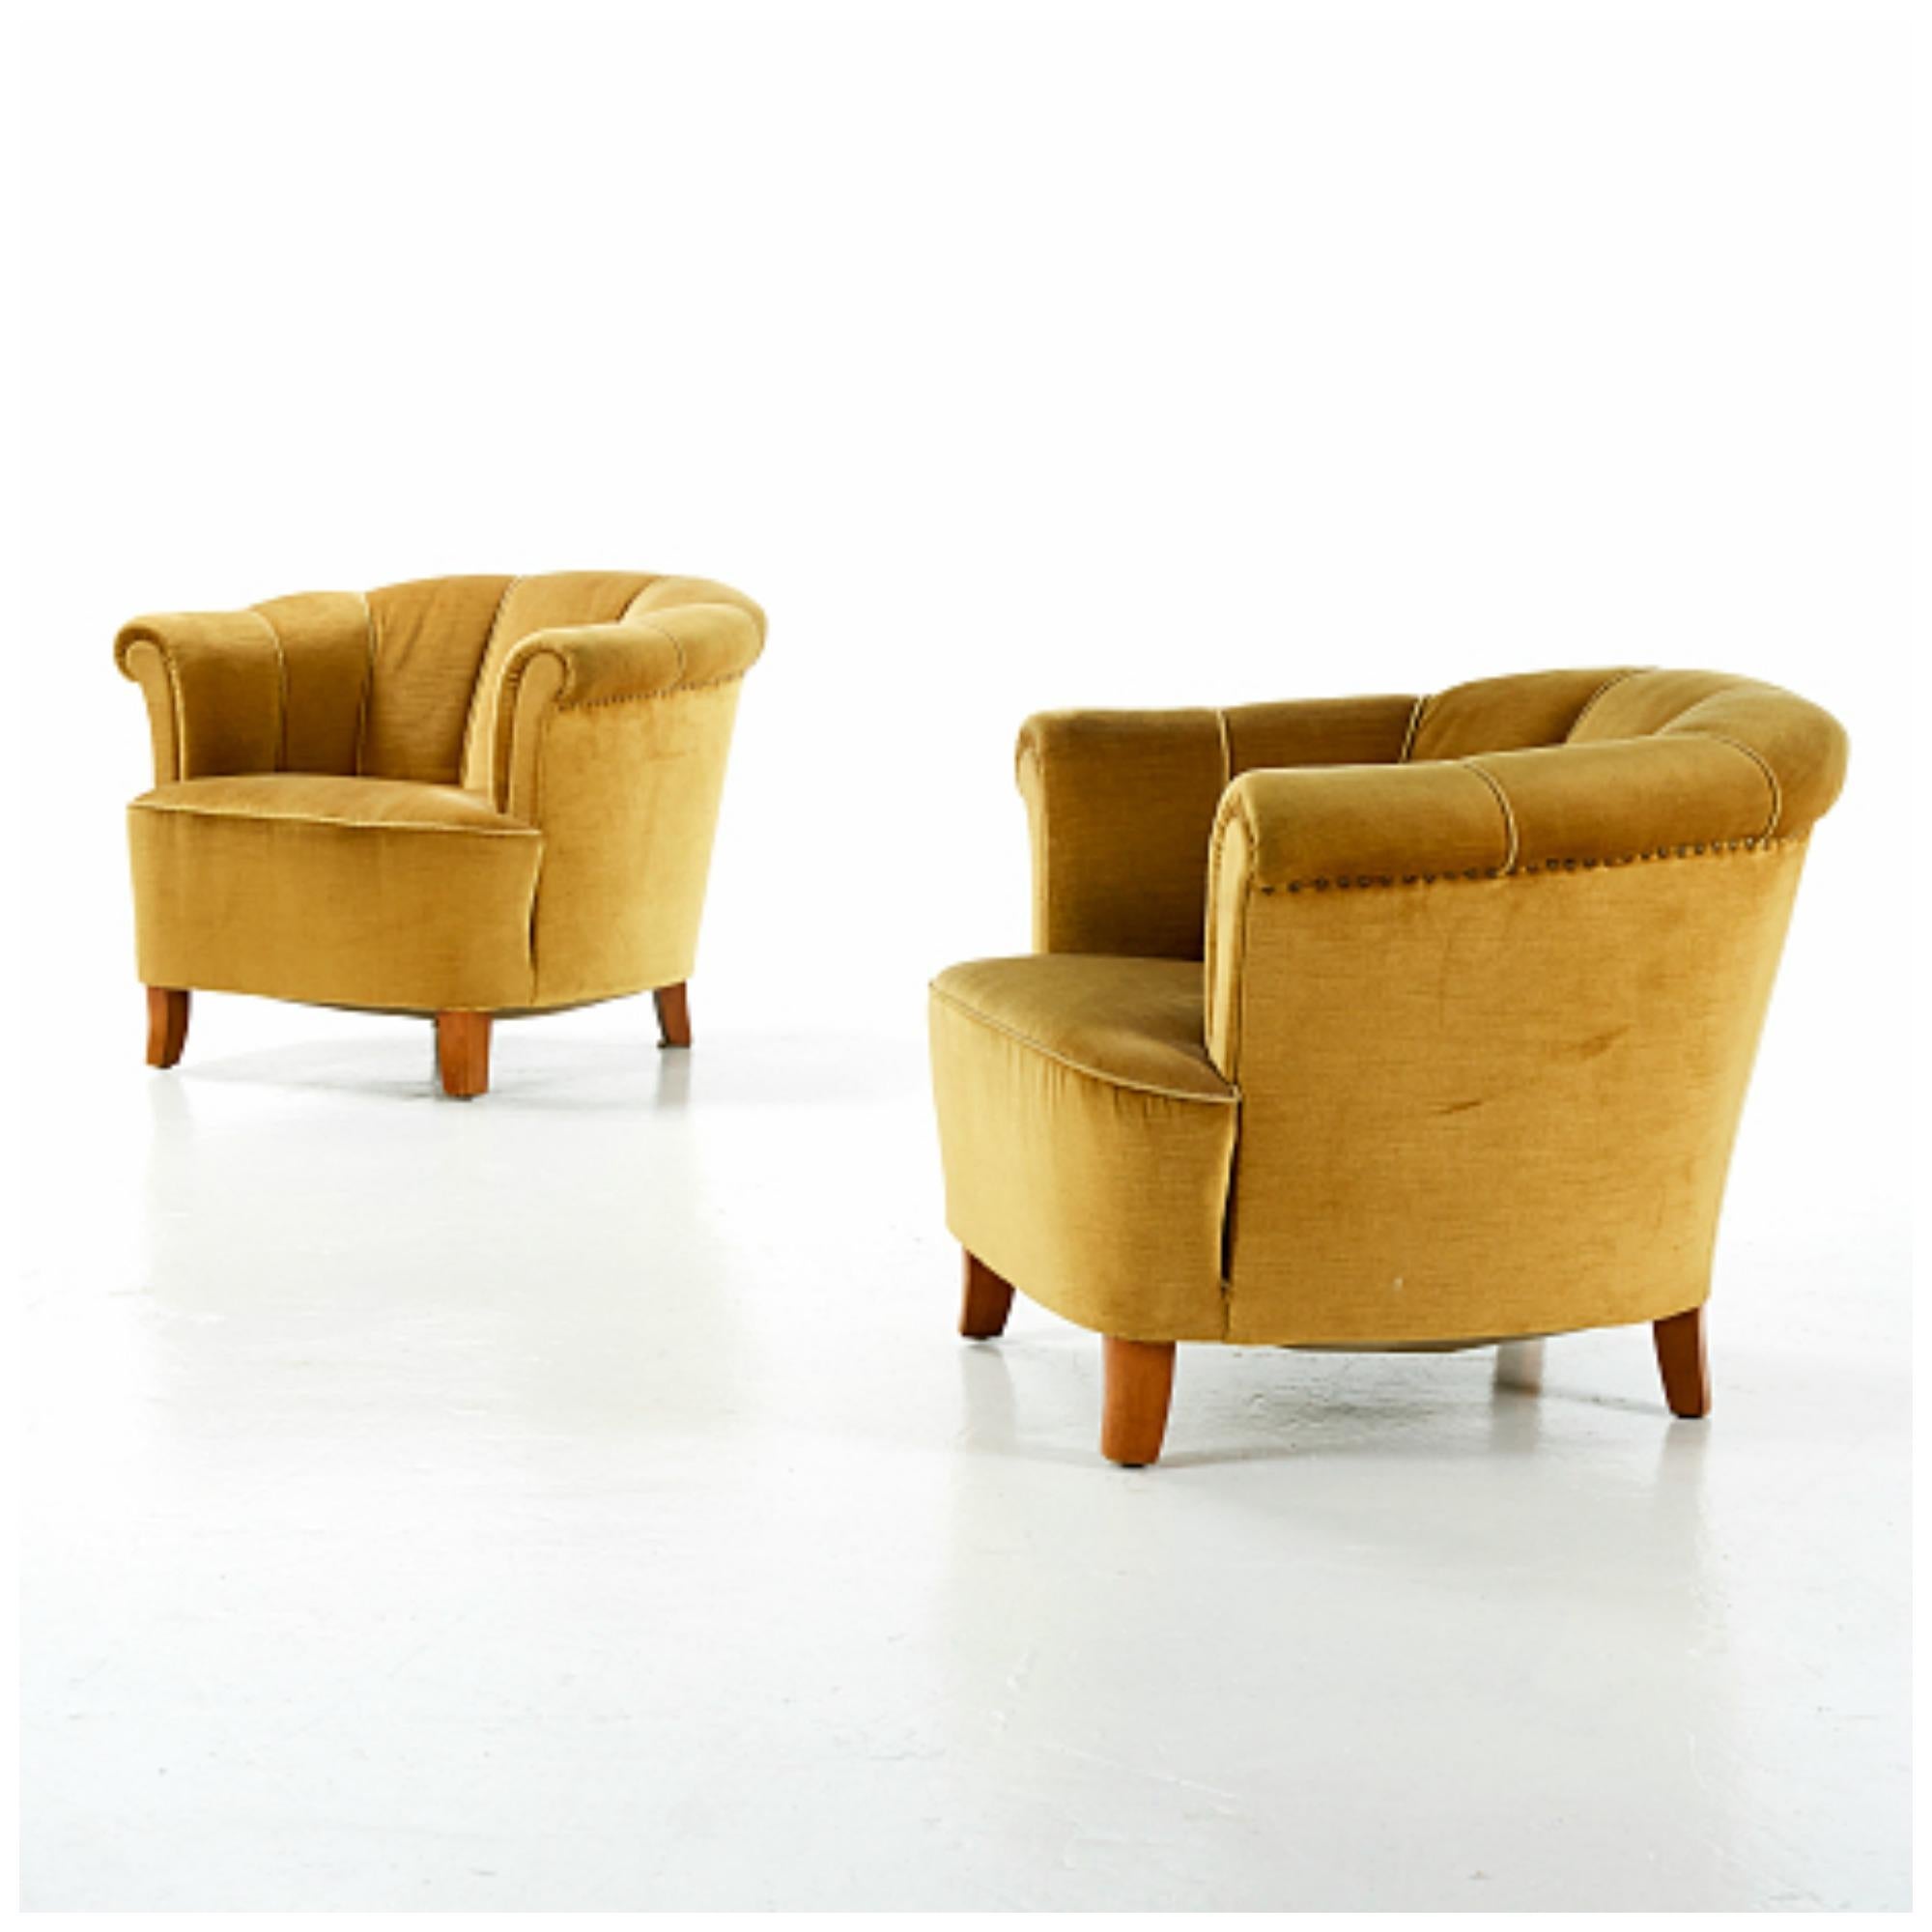 Swedish Otto Schulz Pair of 1940s Lounge Chairs for Boet, Scandinavian, Midcentury